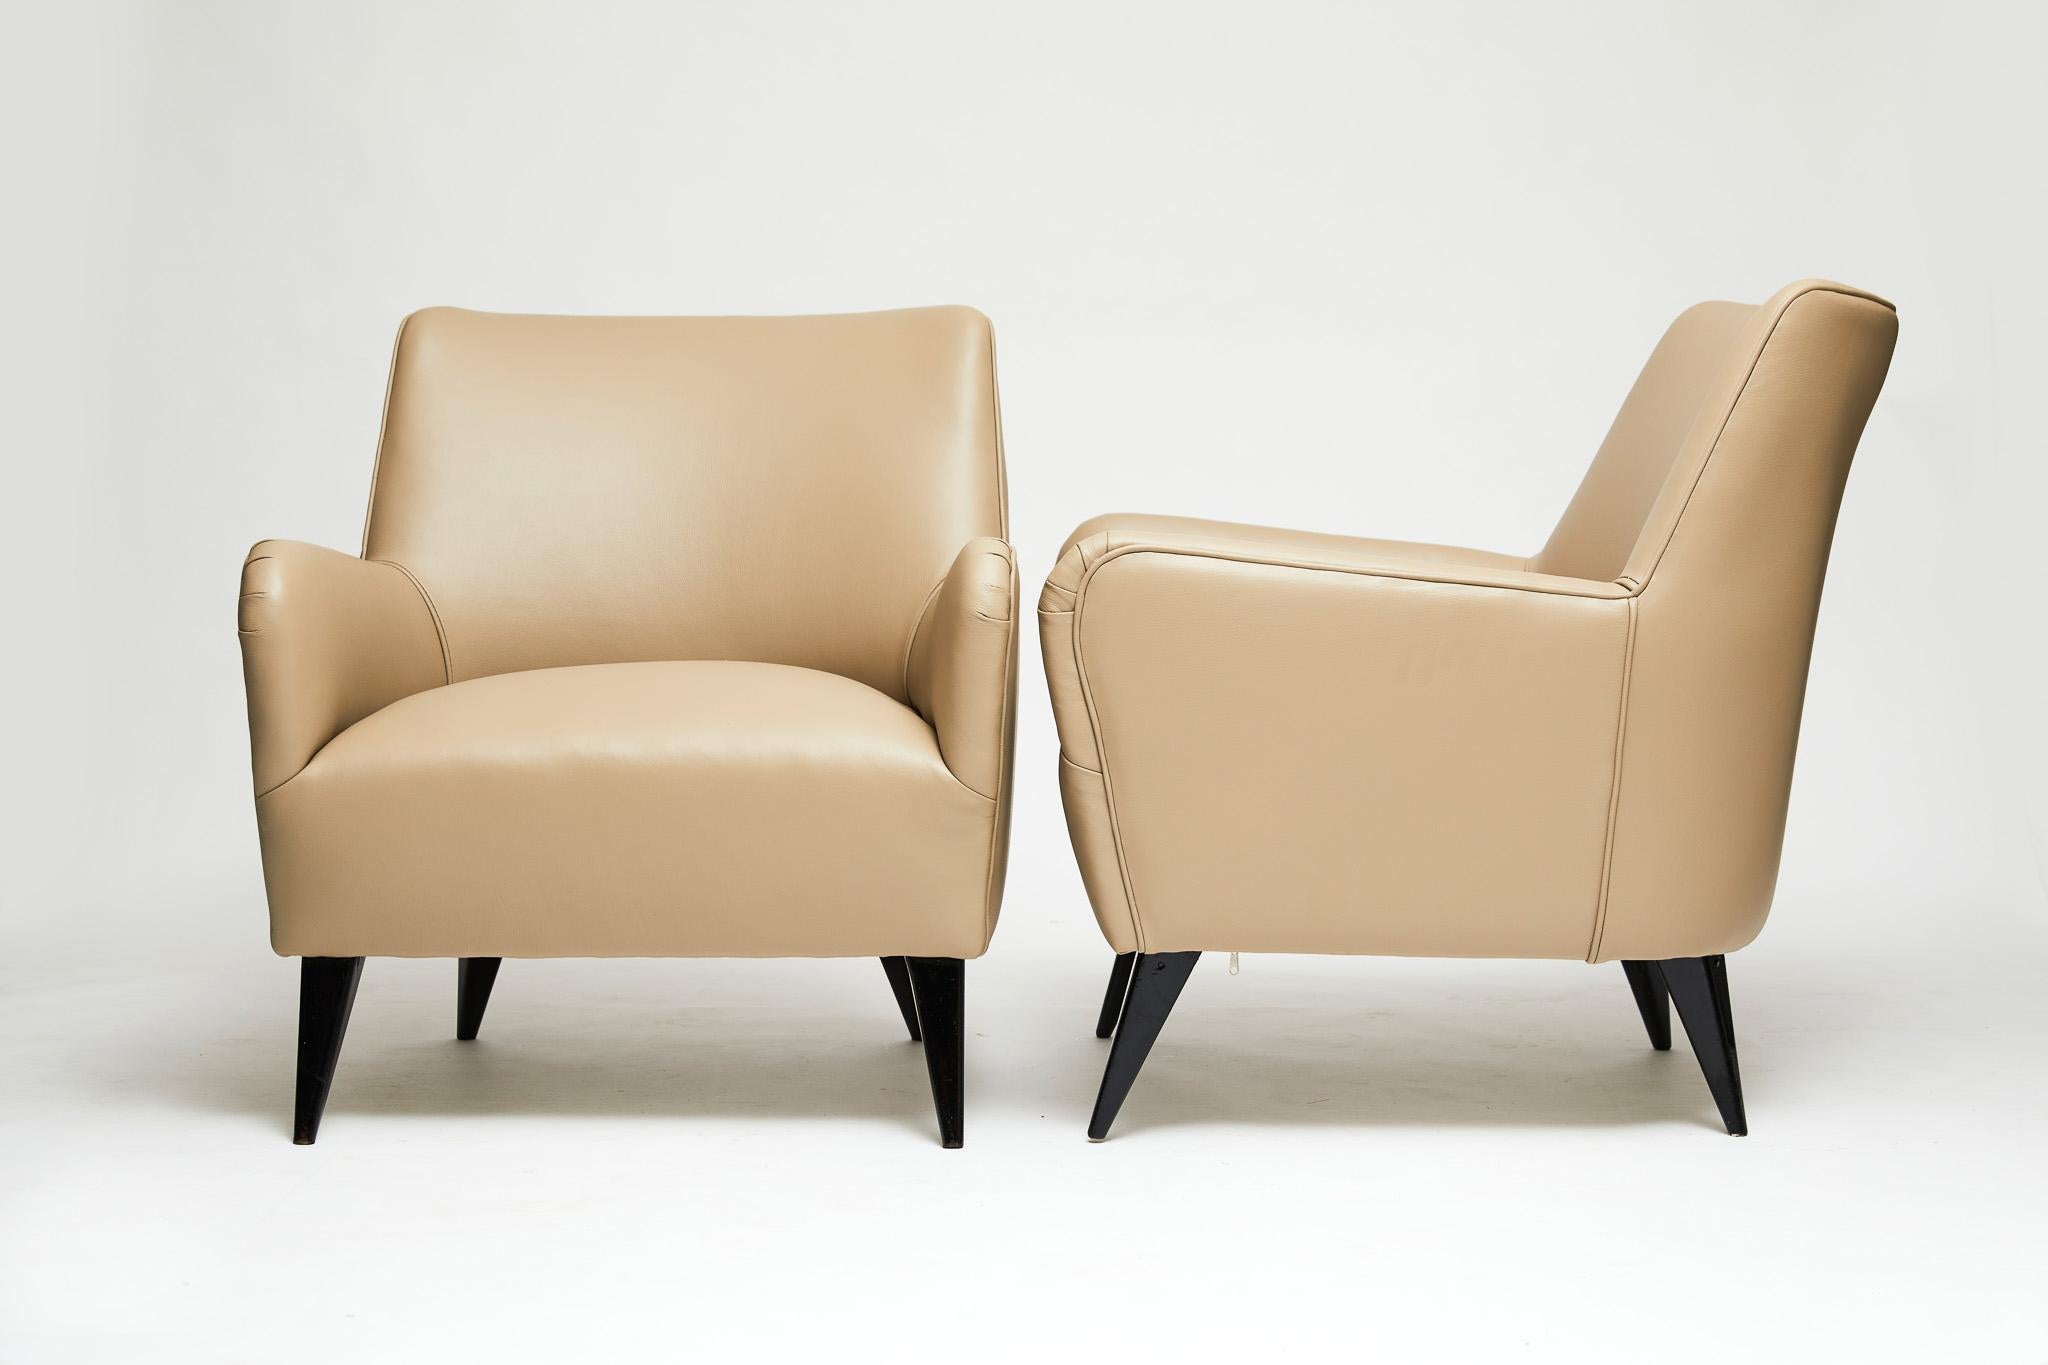 Hand-Crafted Mid-Century Modern Armchairs in Leather & Wood by Joaquim Tenreiro, 1955, Brazil For Sale